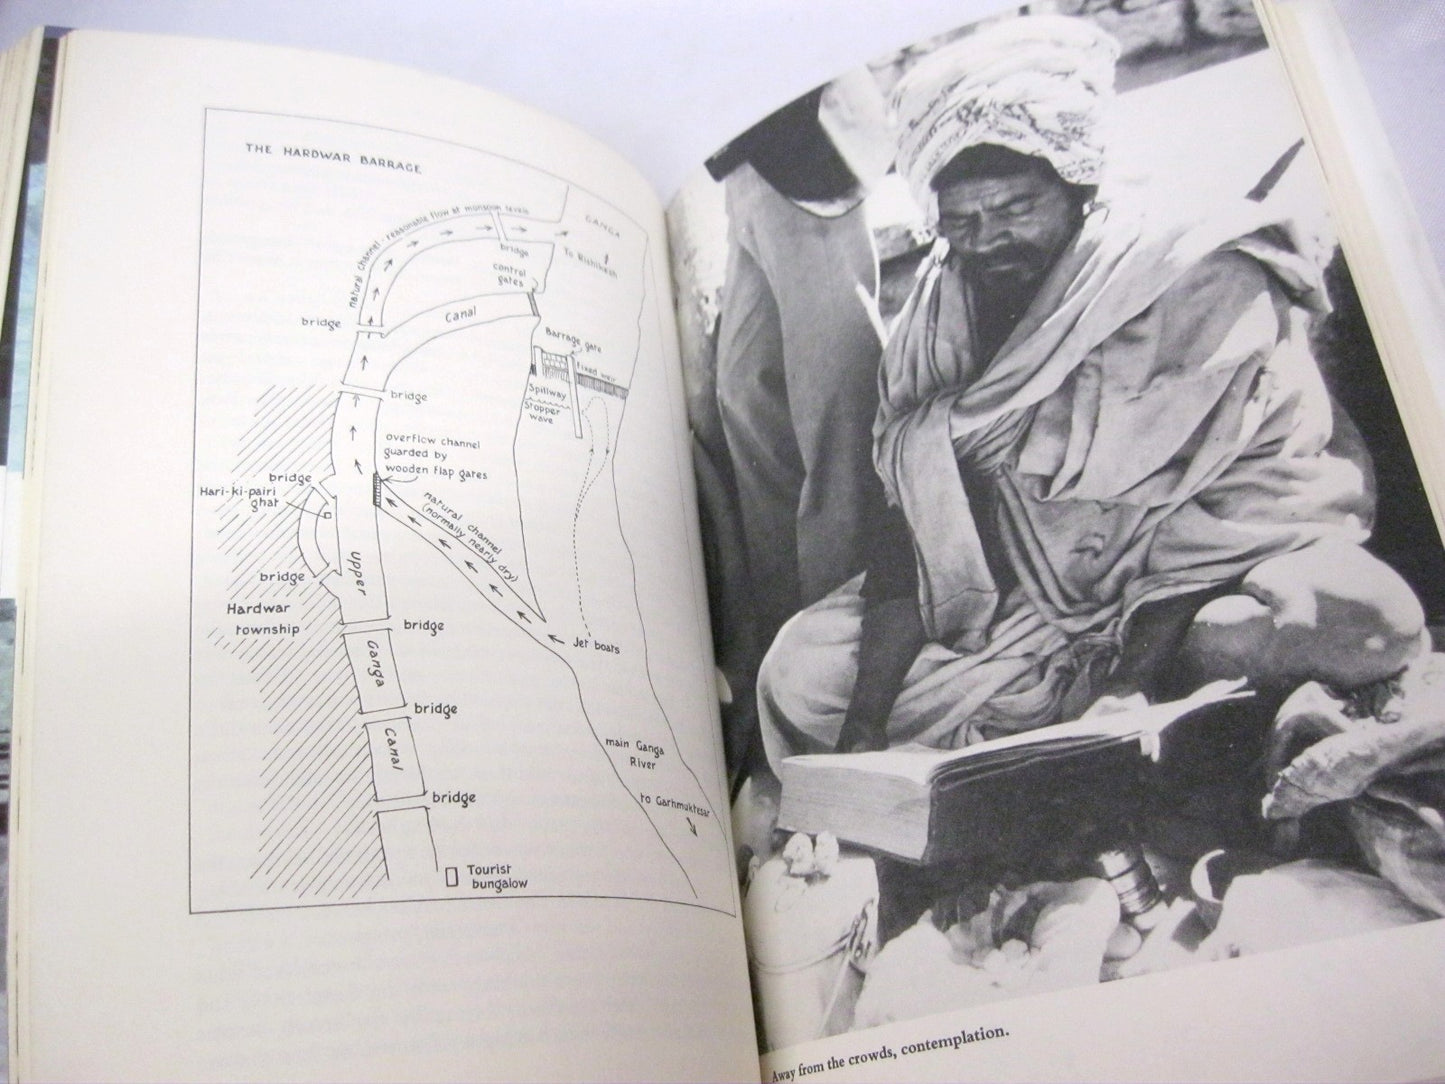 From The Ocean to the Sky: Jet Boating Up the Ganges by Edmund Hillary